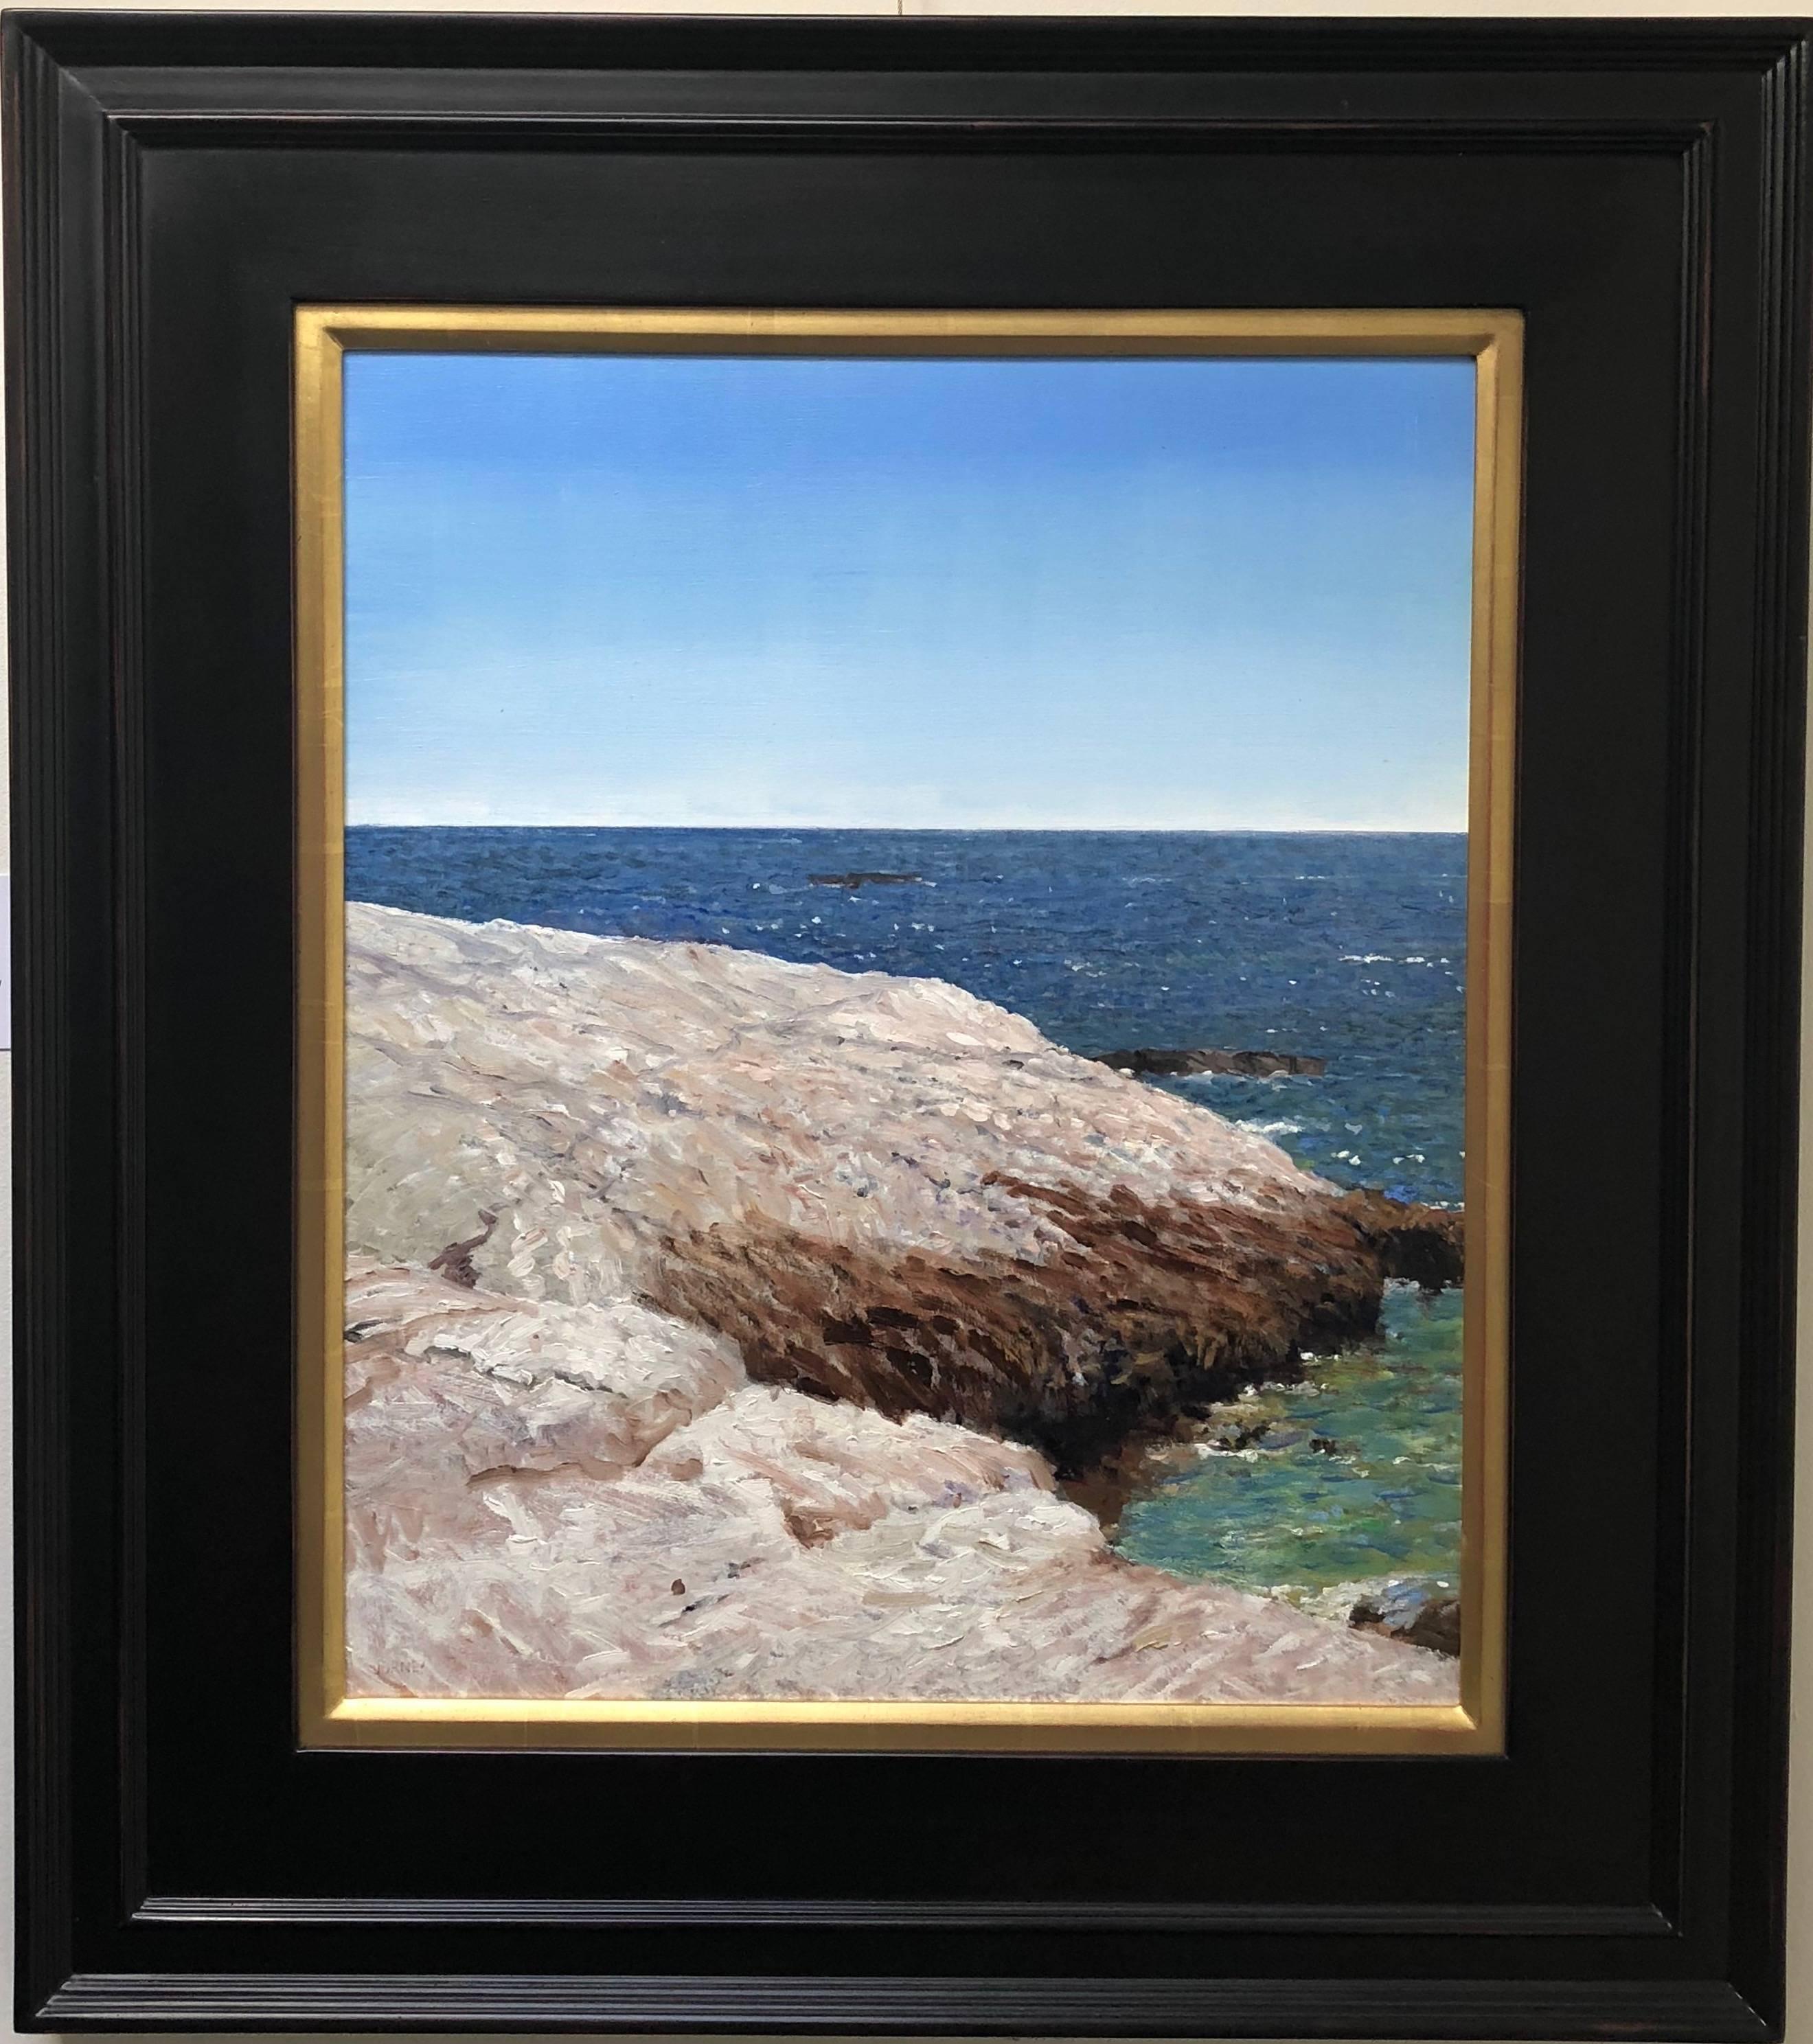 Star Island: Outermost Rocks - Painting by Donald Jurney